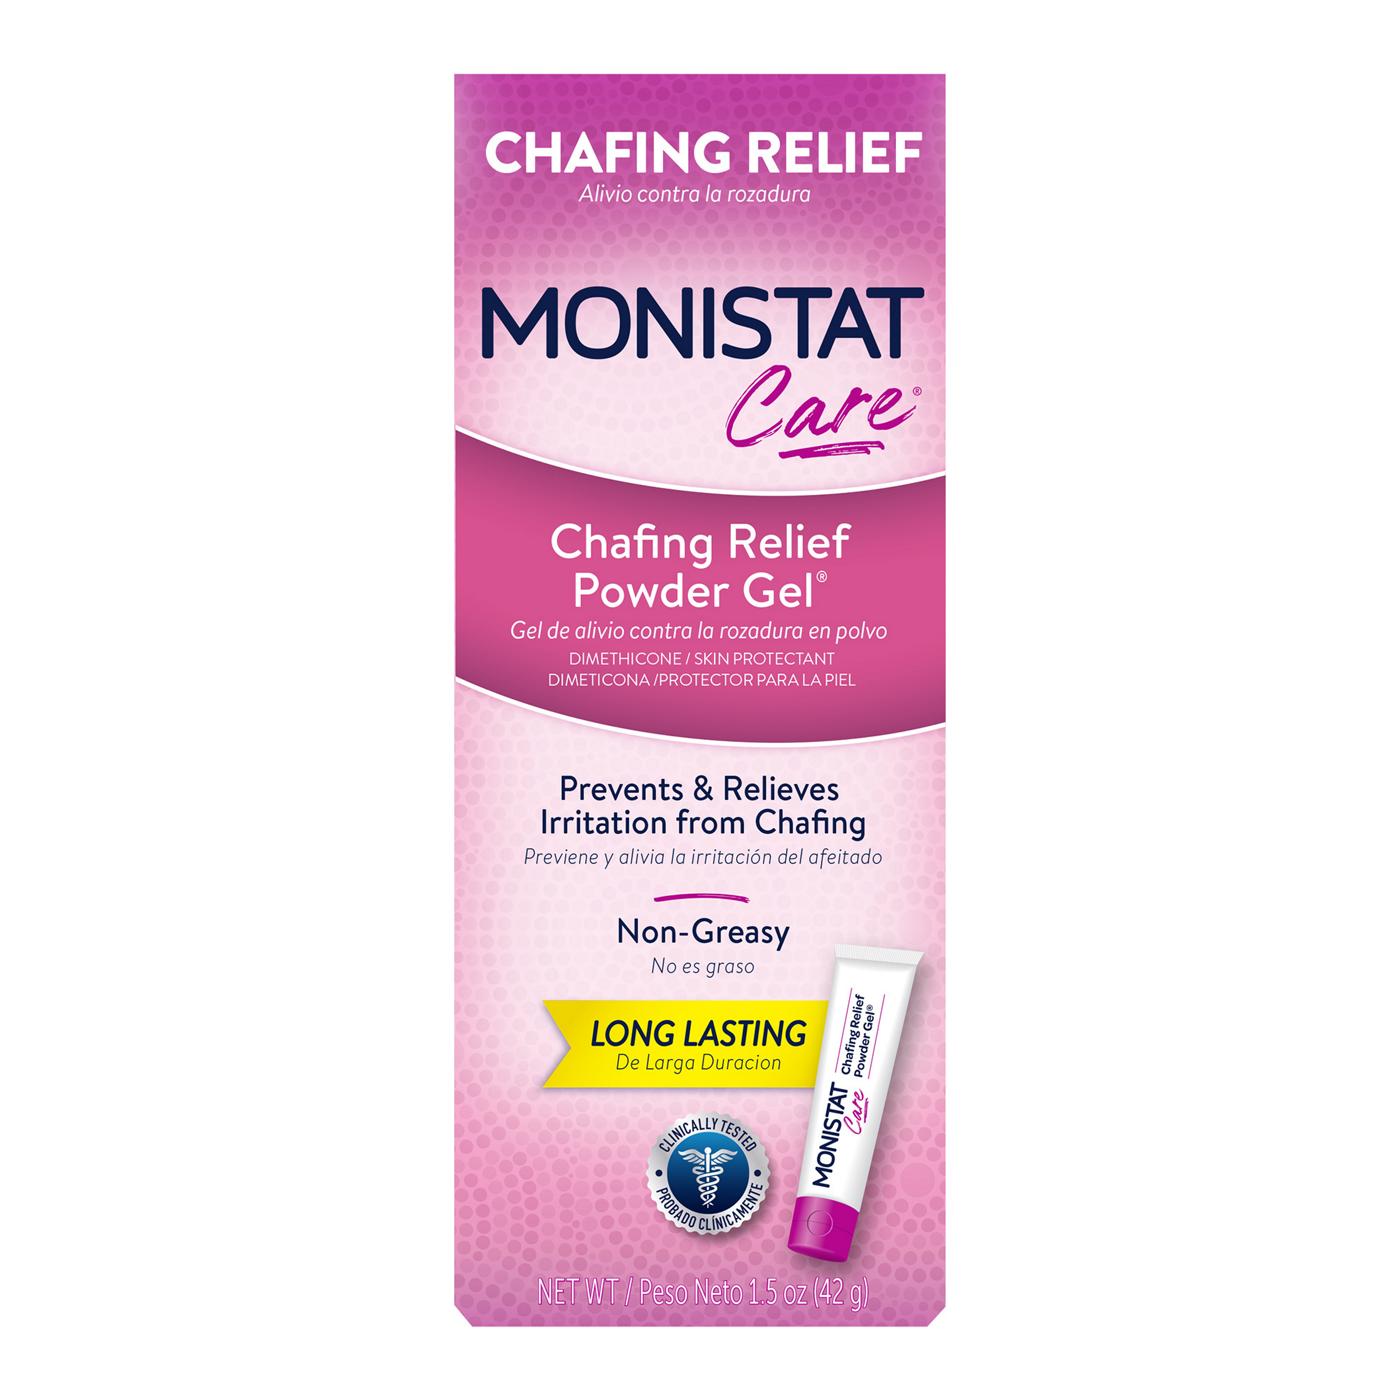 Monistat Chafing Relief Powder Gel, Anti-Chafe Protection - Shop